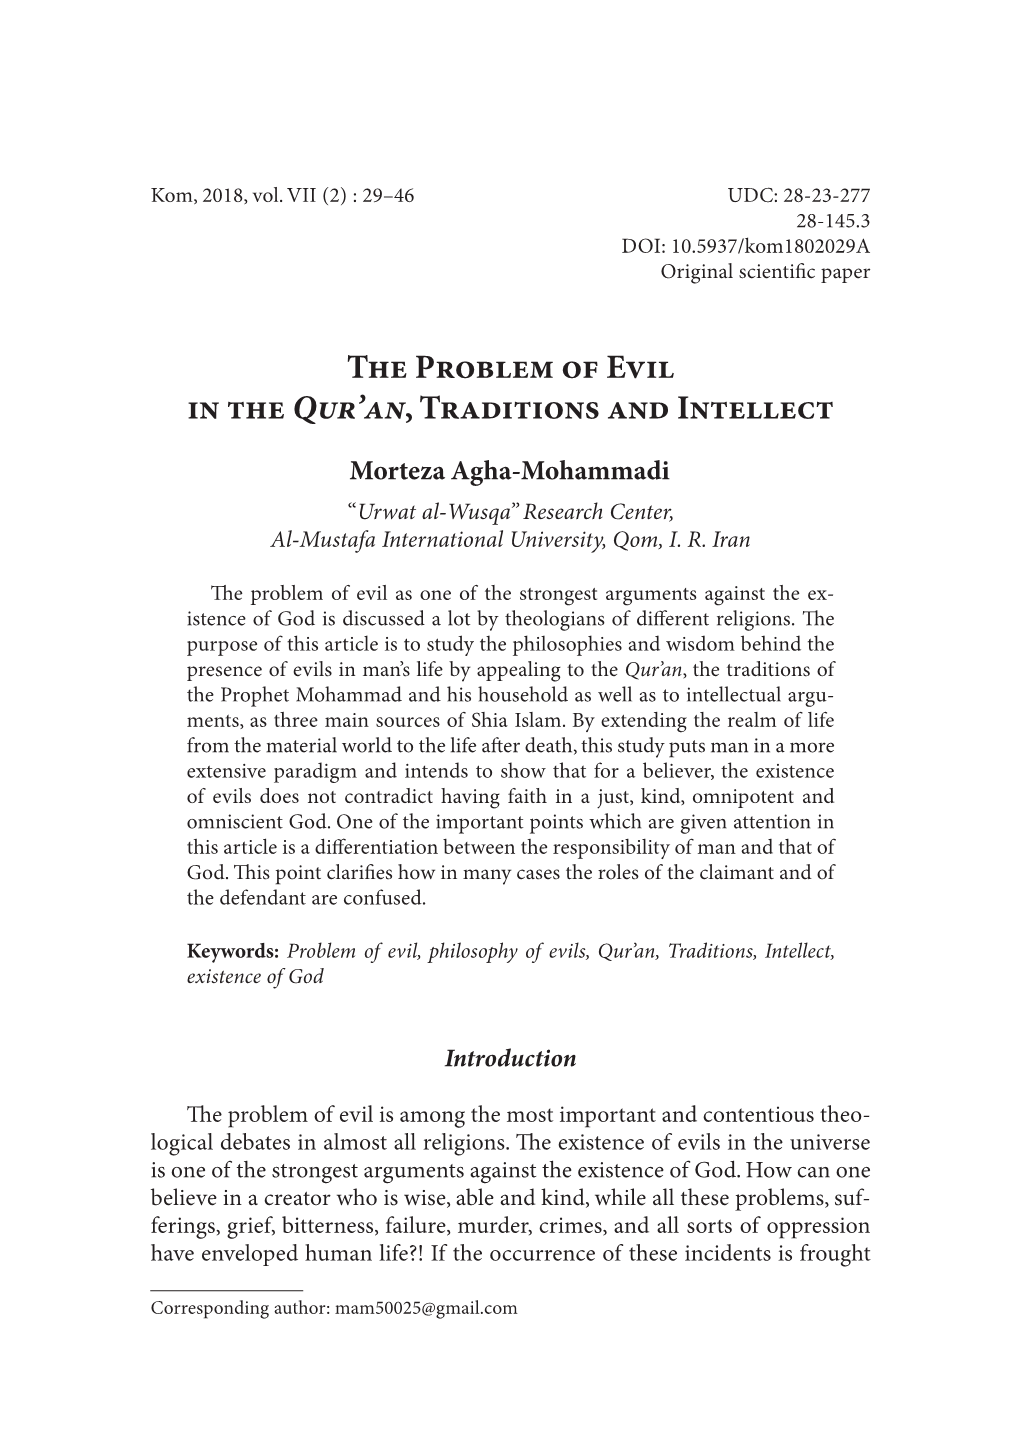 The Problem of Evil in the Qur'an, Traditions and Intellect